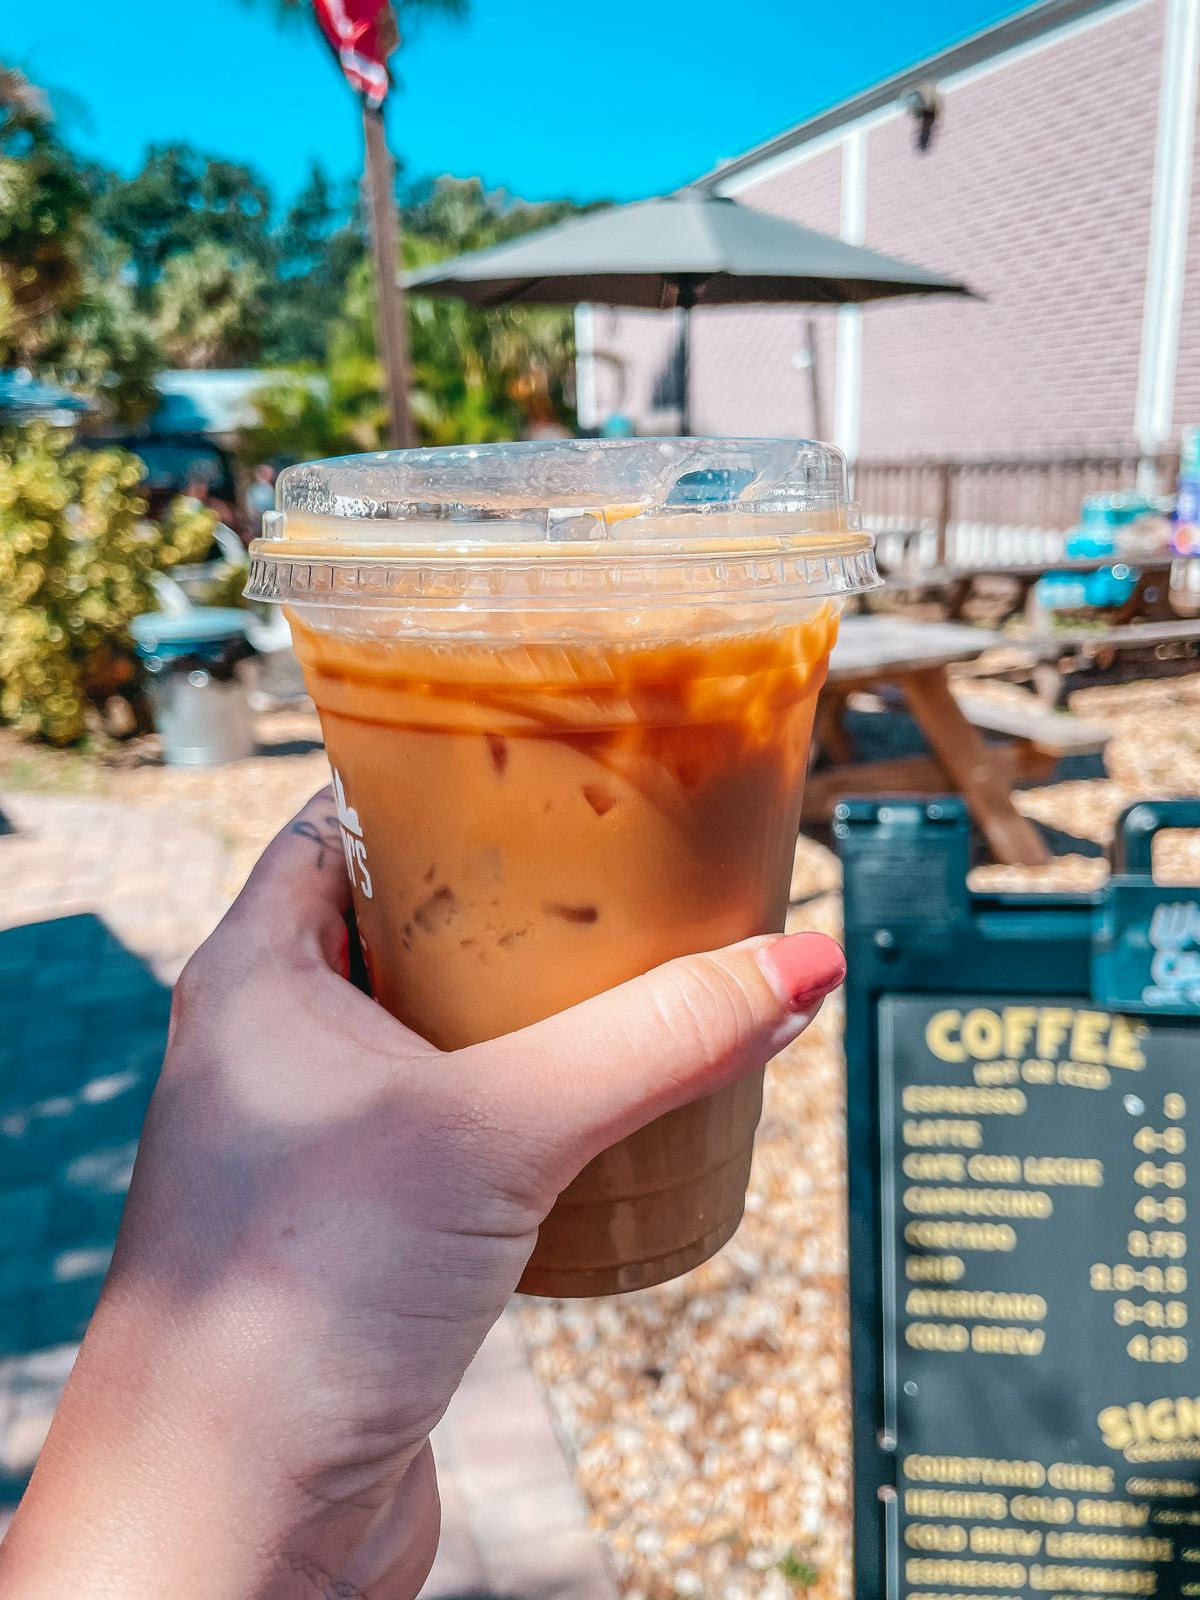 Spaddys cold brew coffee shop in Seminole Heights